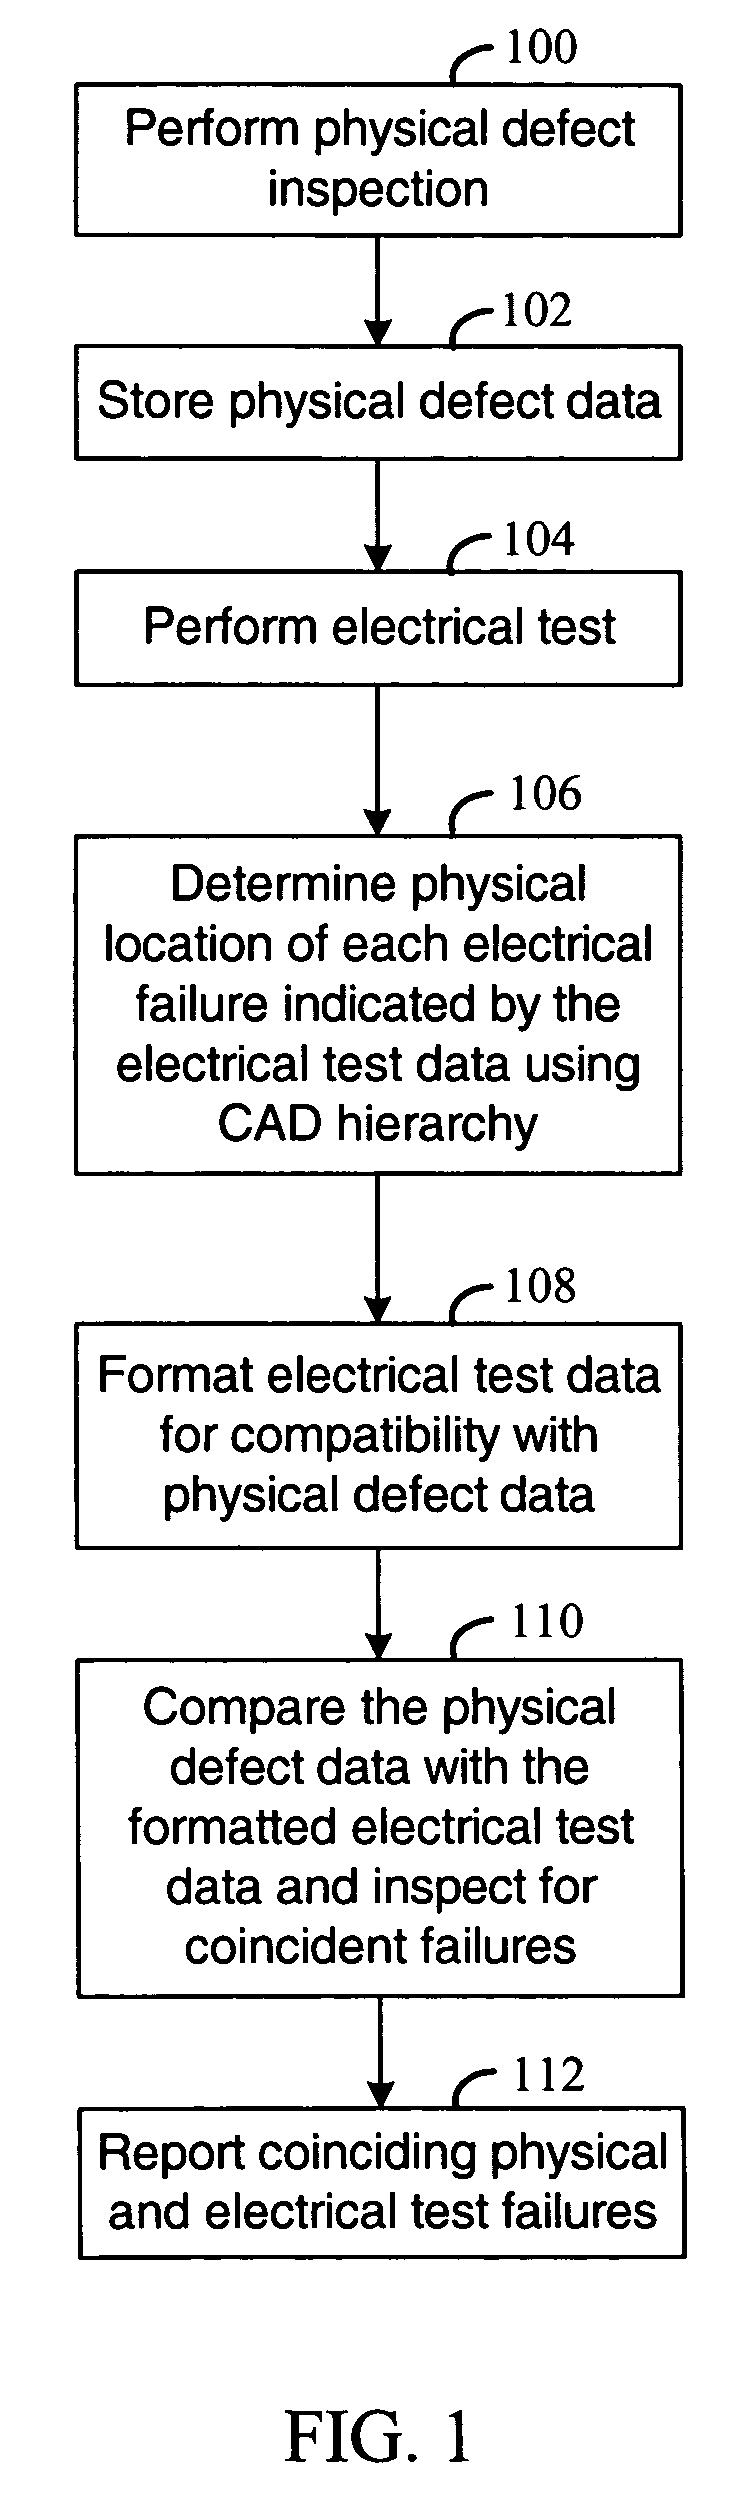 Correlation of electrical test data with physical defect data